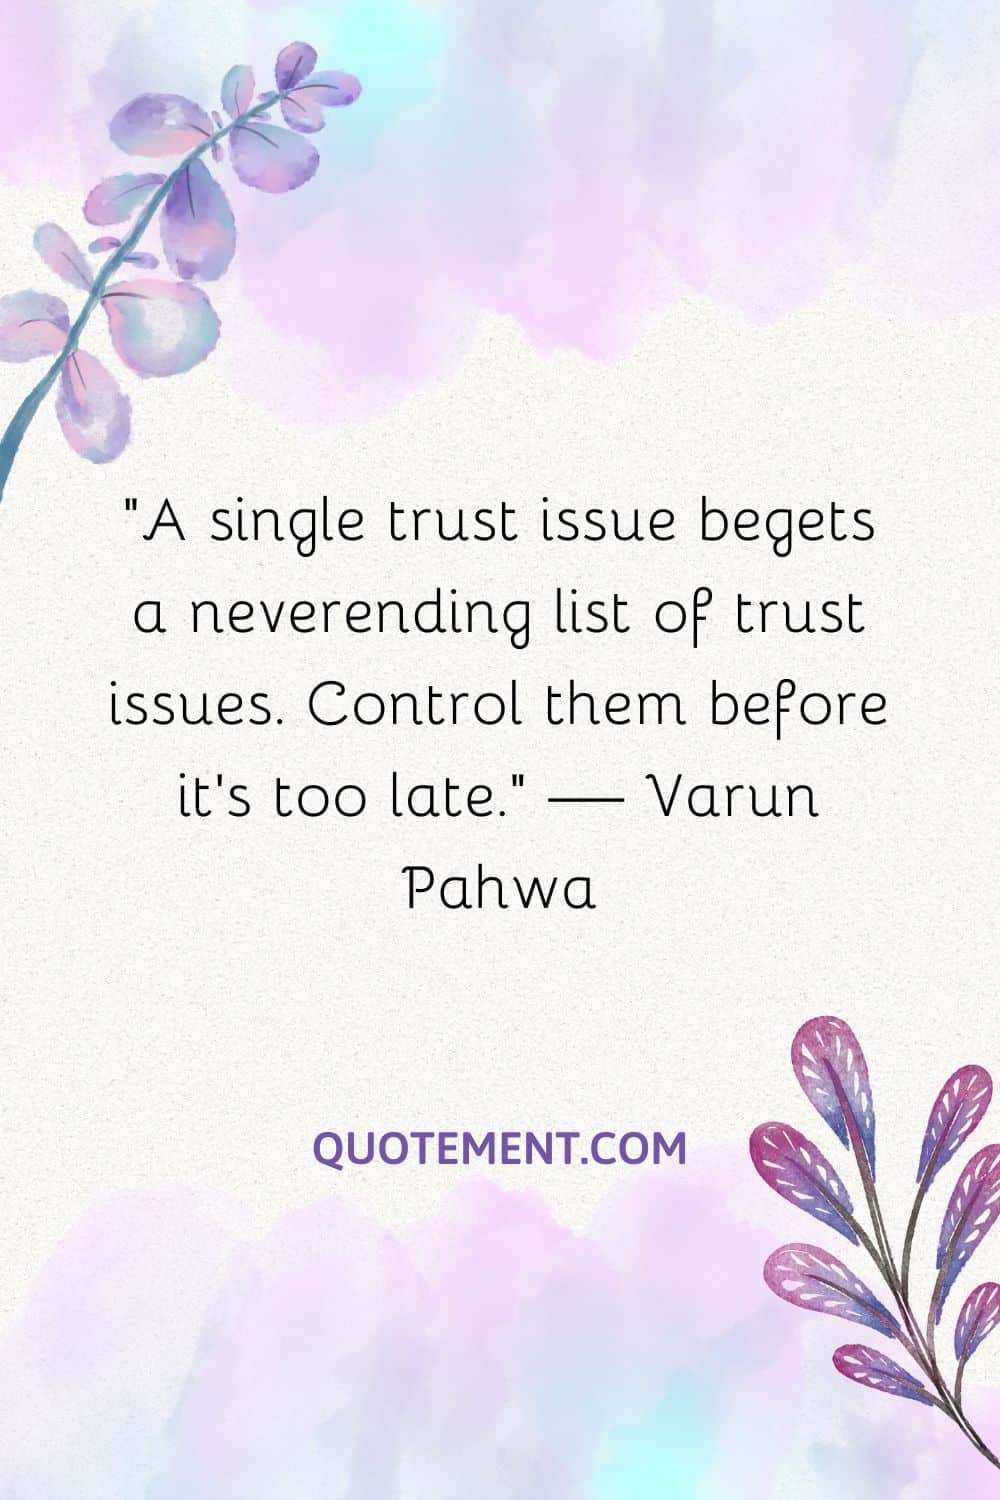 A single trust issue begets a neverending list of trust issues. Control them before it’s too late